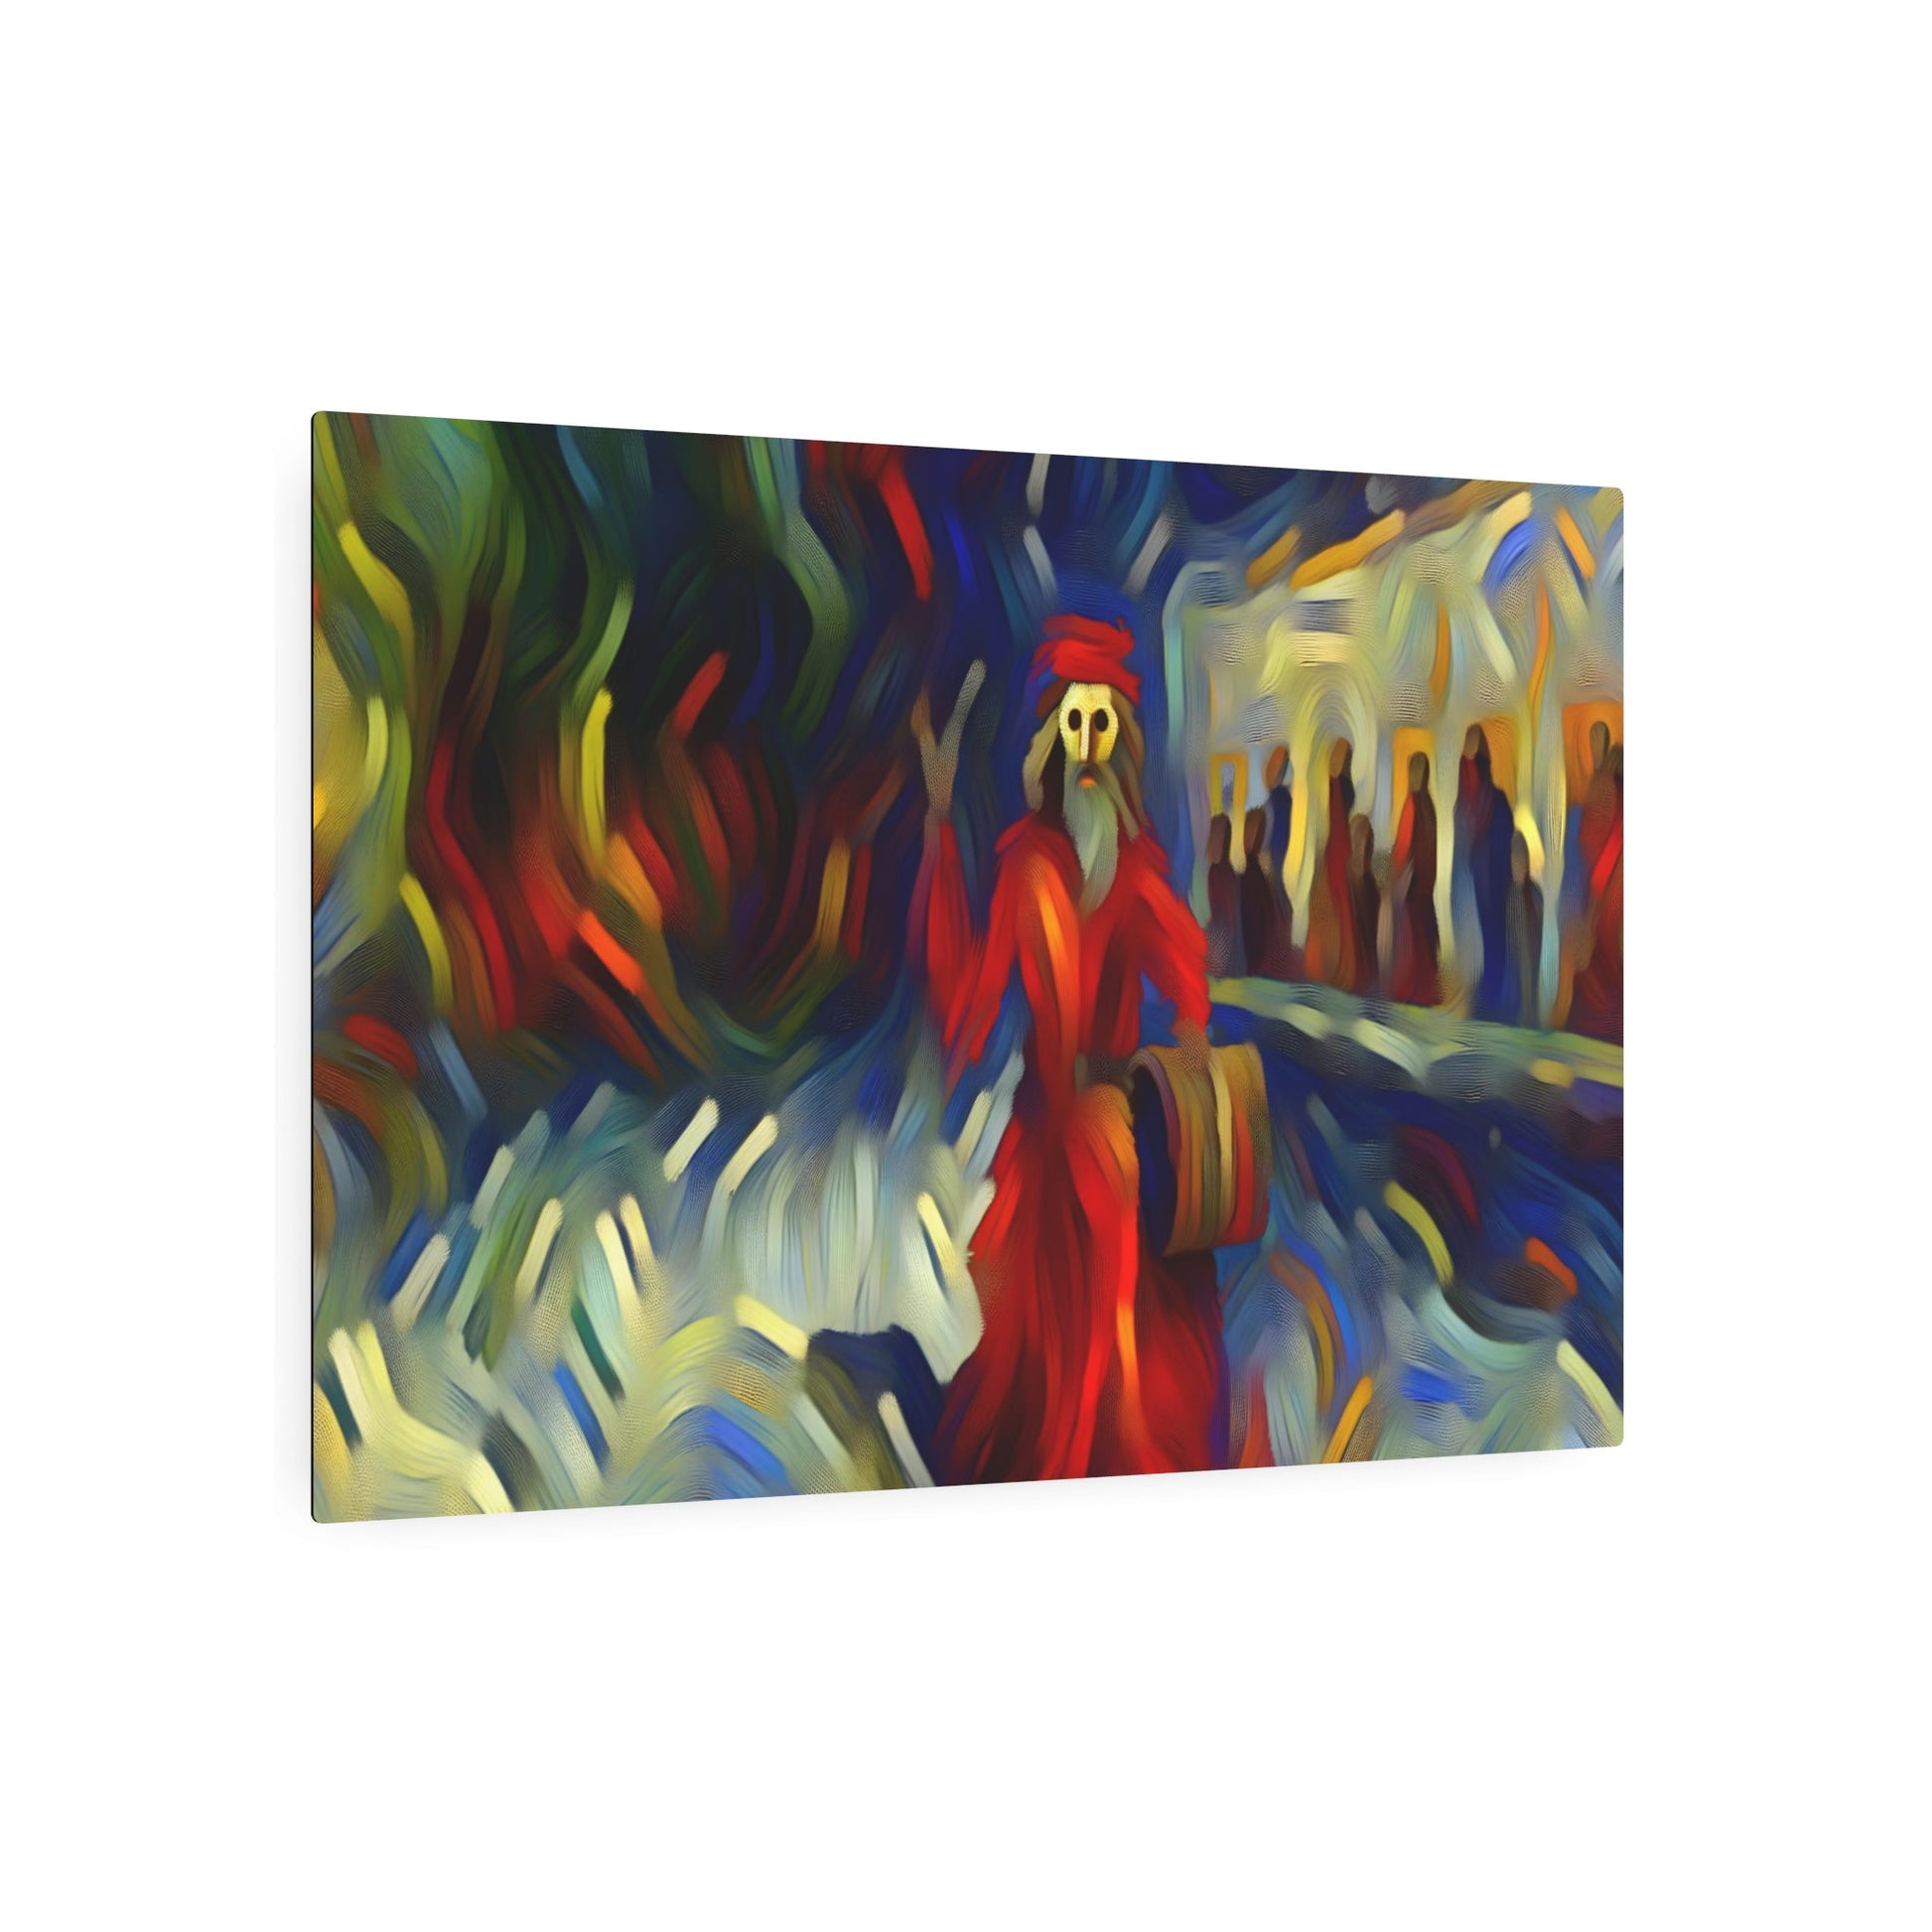 Metal Poster Art | "Expressionism Western Art - Bold and Dramatic Vivid Abstract Scene with Isolated Figure in Chaotic Landscape, Intense Emotional Style" - Metal Poster Art 36″ x 24″ (Horizontal) 0.12''